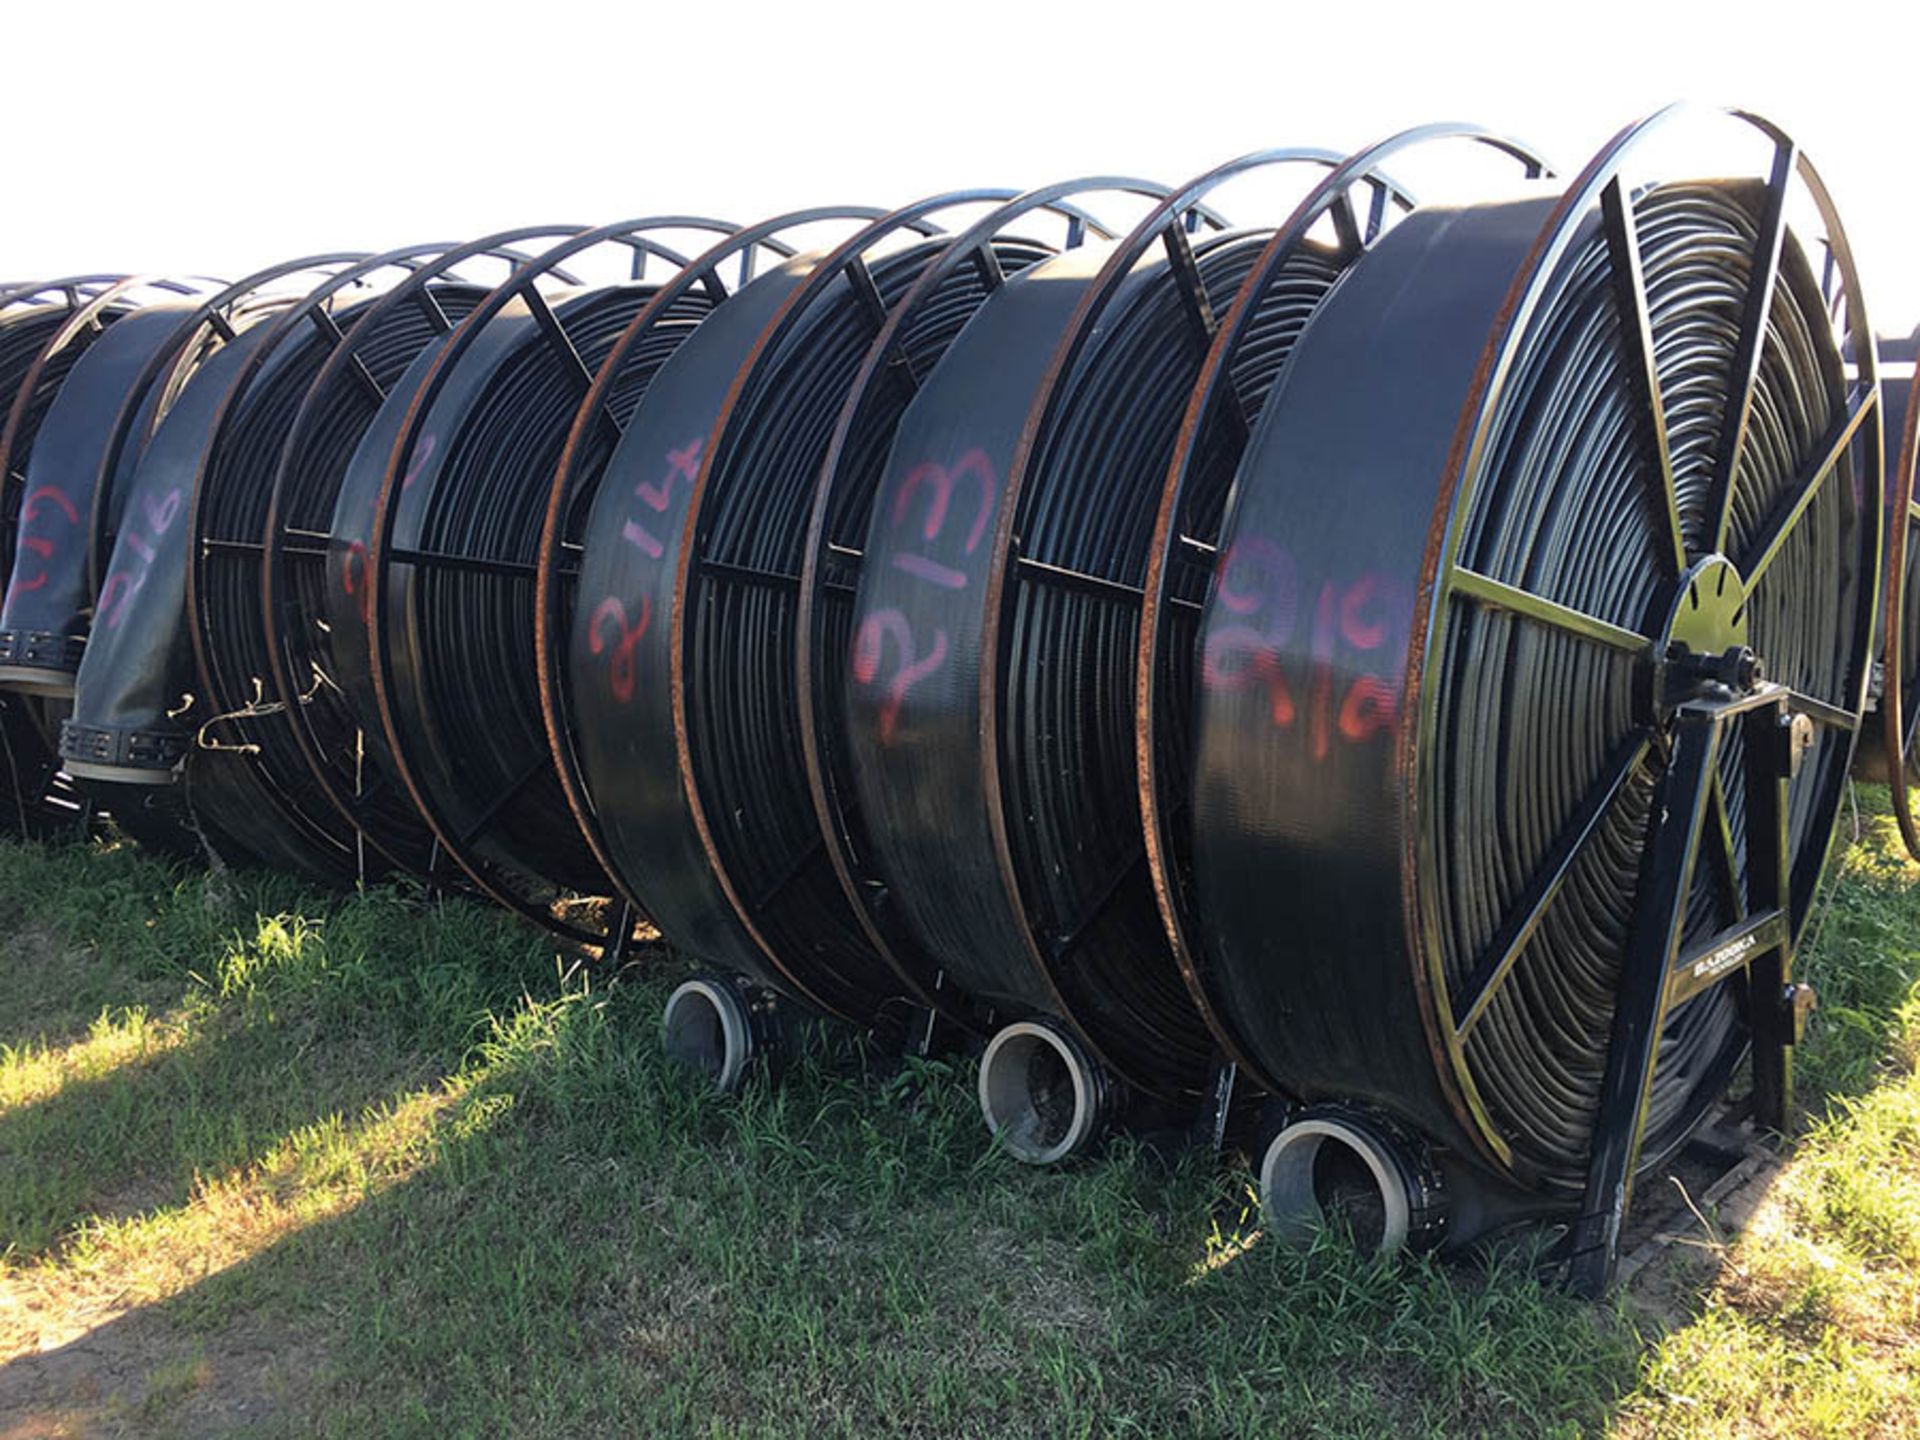 660ft. of 12in. LAY FLAT HOSE ON BAZOOKA HOSE REELS, EACH UNIT NUMBERED SEPARATELY WITH PAINT - Image 27 of 39